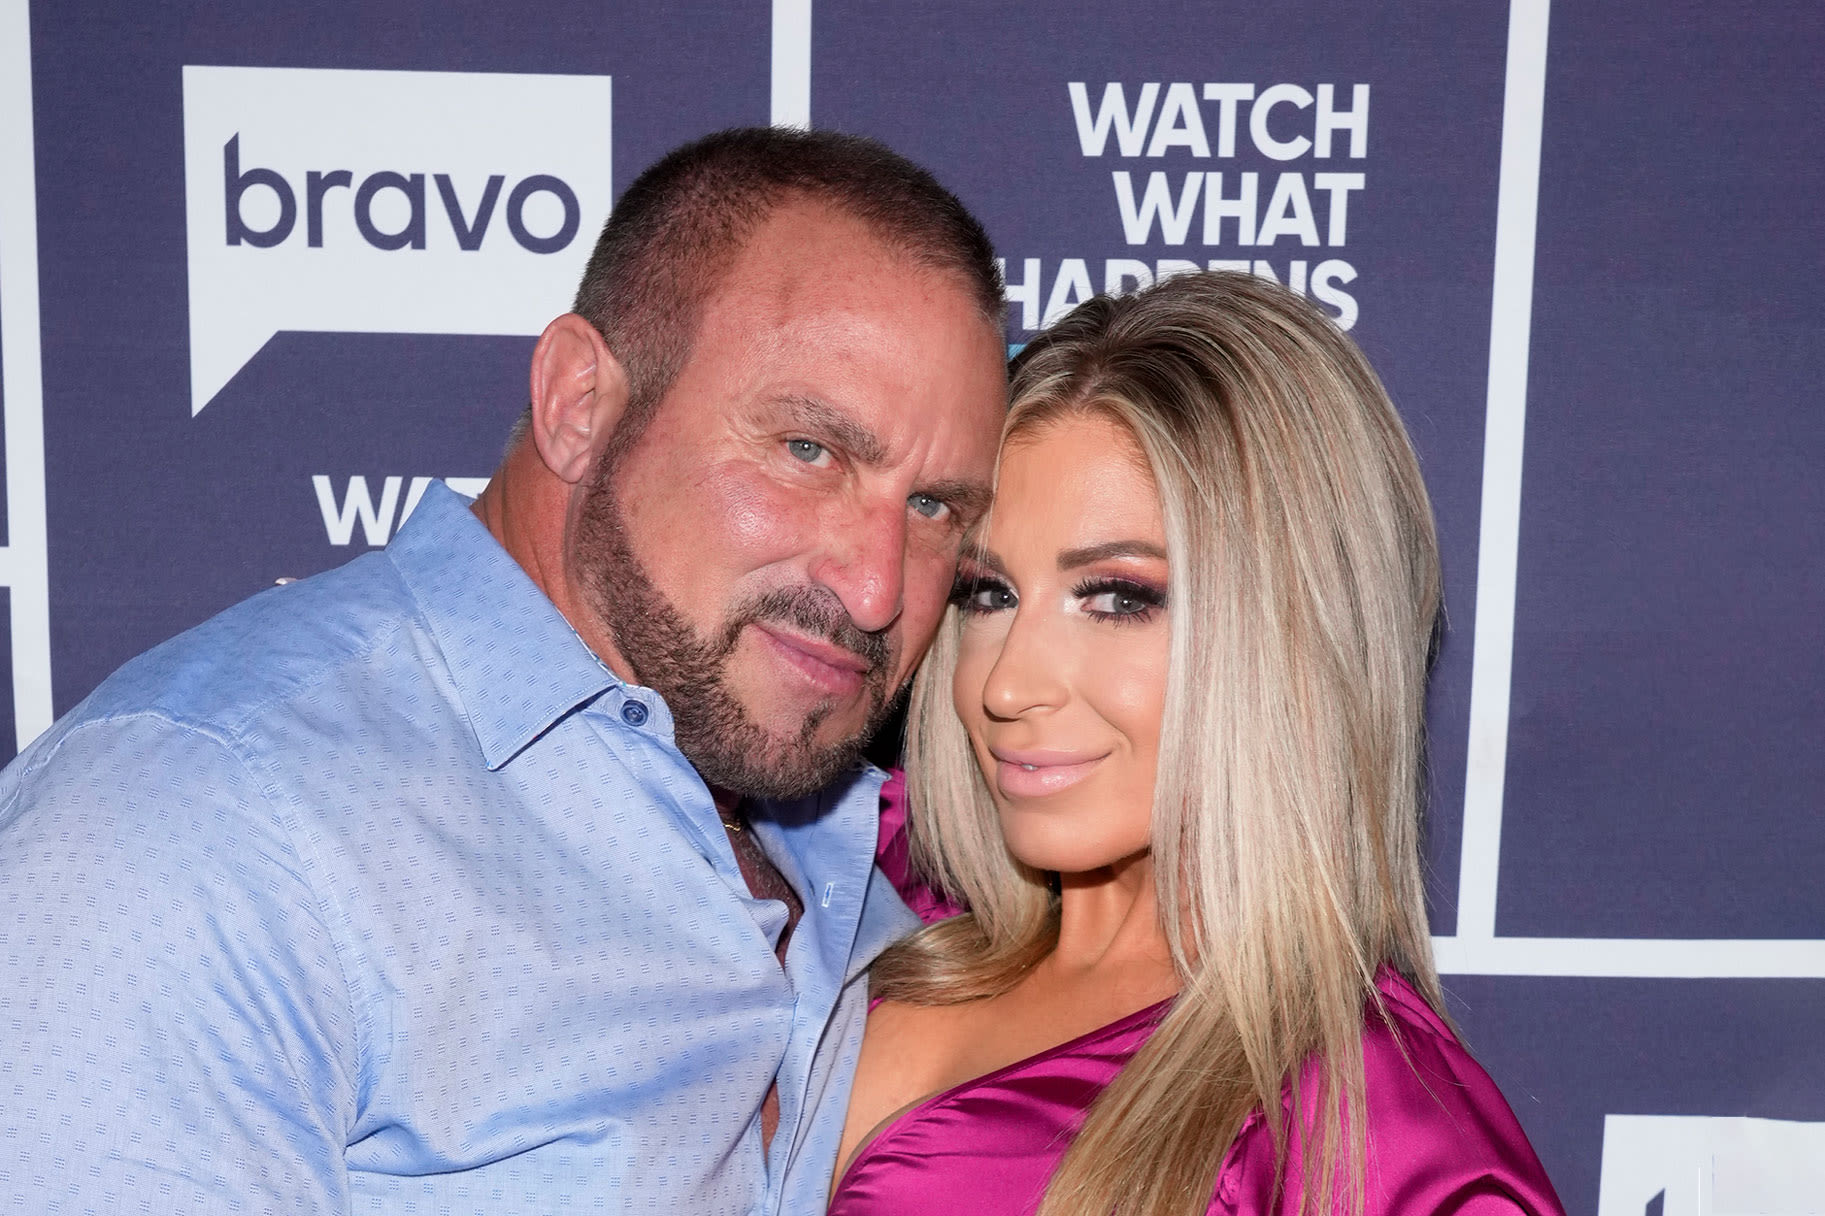 Frank Catania Shows Off Massive Ring He Got for Brittany: “An 11-Carat Diamond!” | Bravo TV Official Site